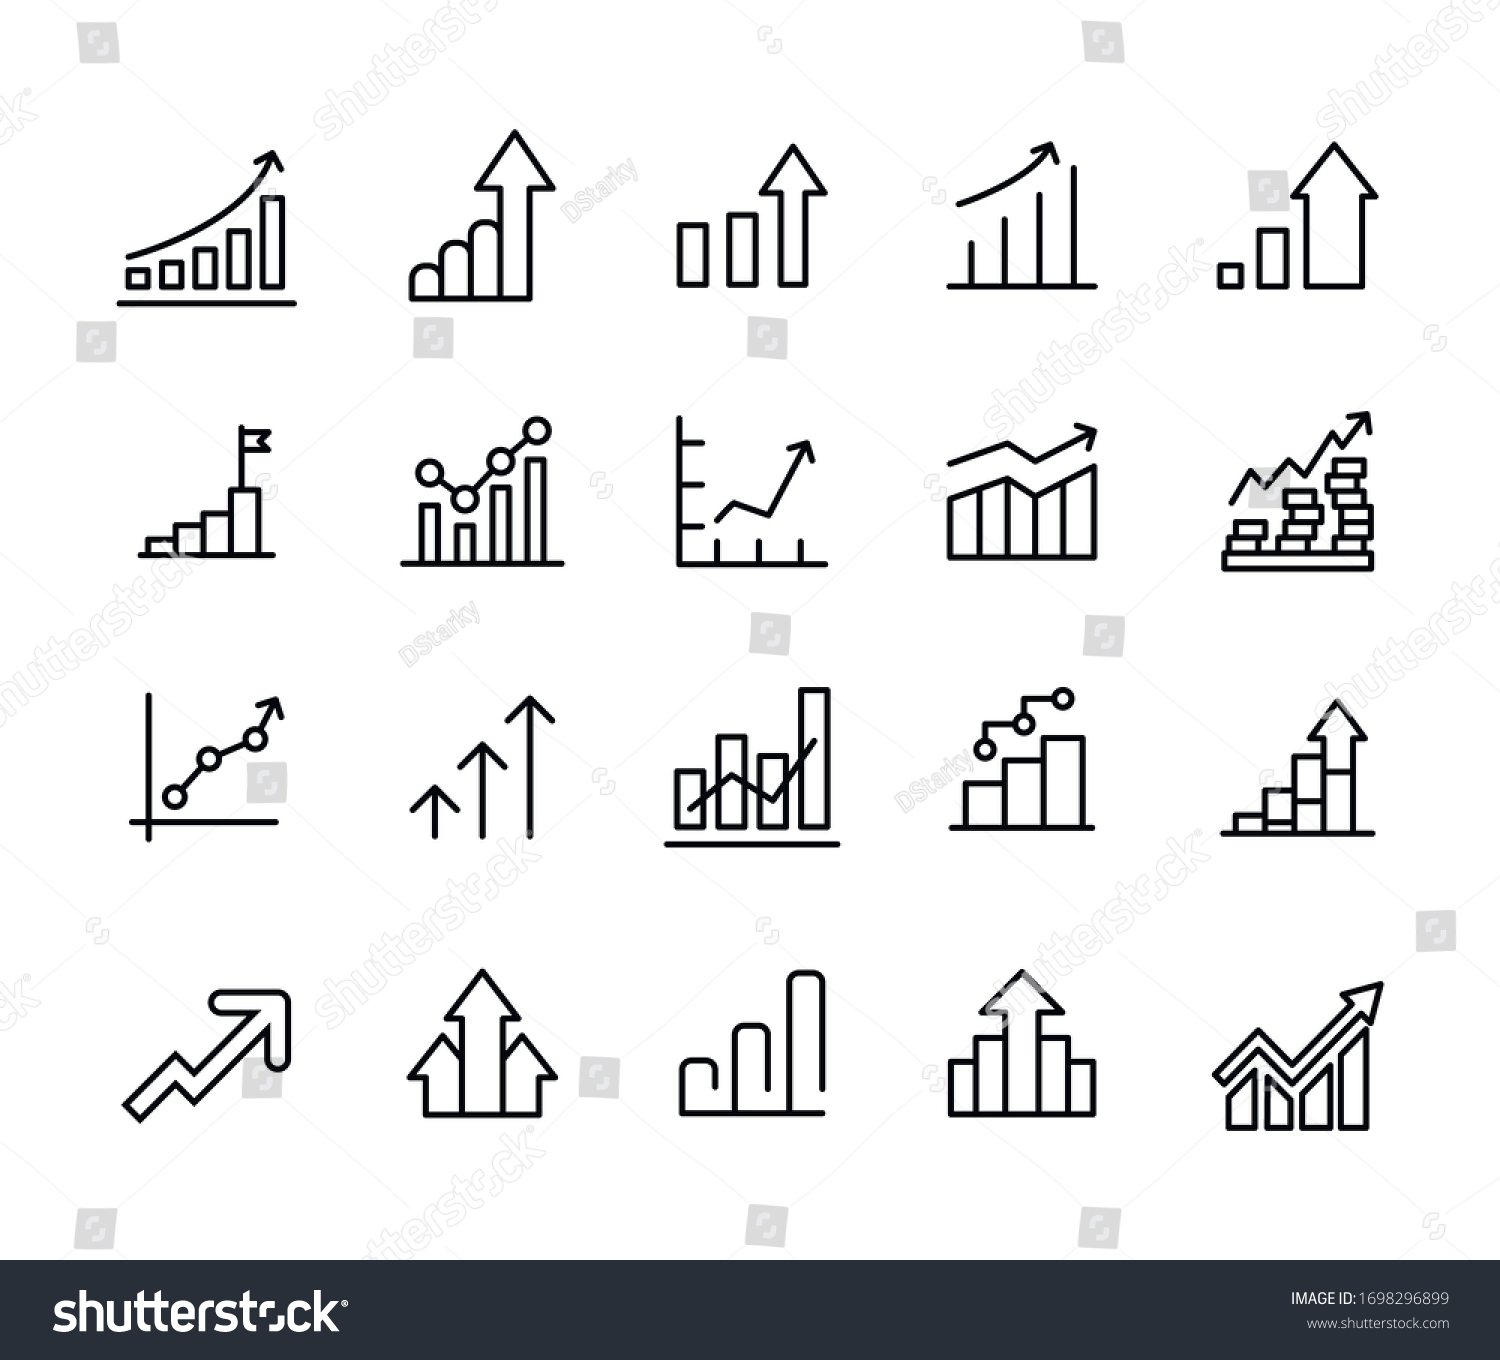 SVG of Vector line icons collection of growth. Vector outline pictograms isolated on a white background. Line icons collection for web apps and mobile concept. Premium quality symbols svg